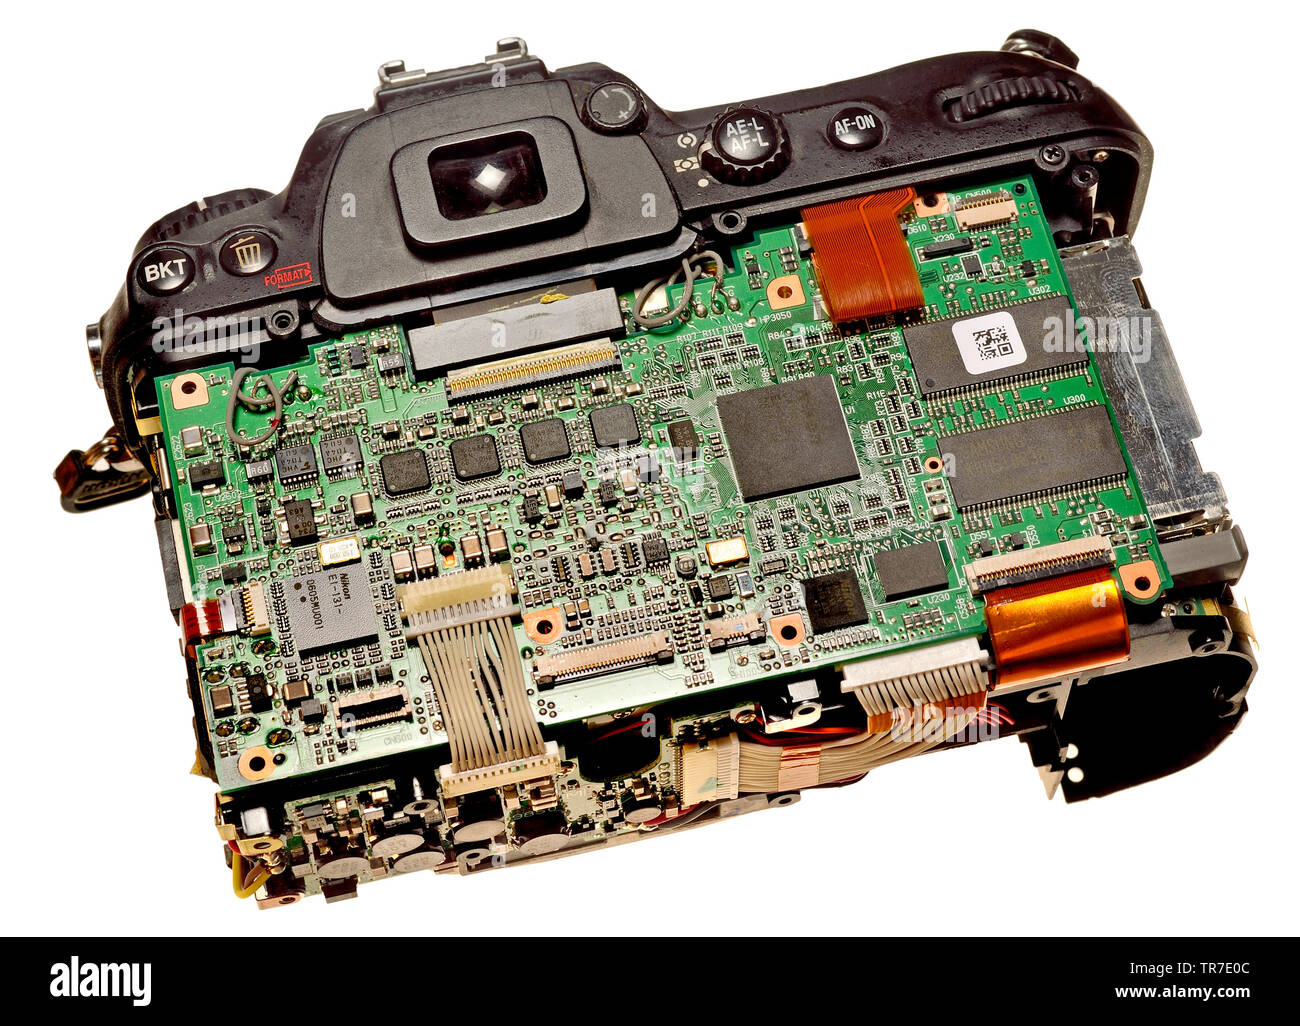 Workings of a digital camera (Nikon D200) with the back removed Stock Photo